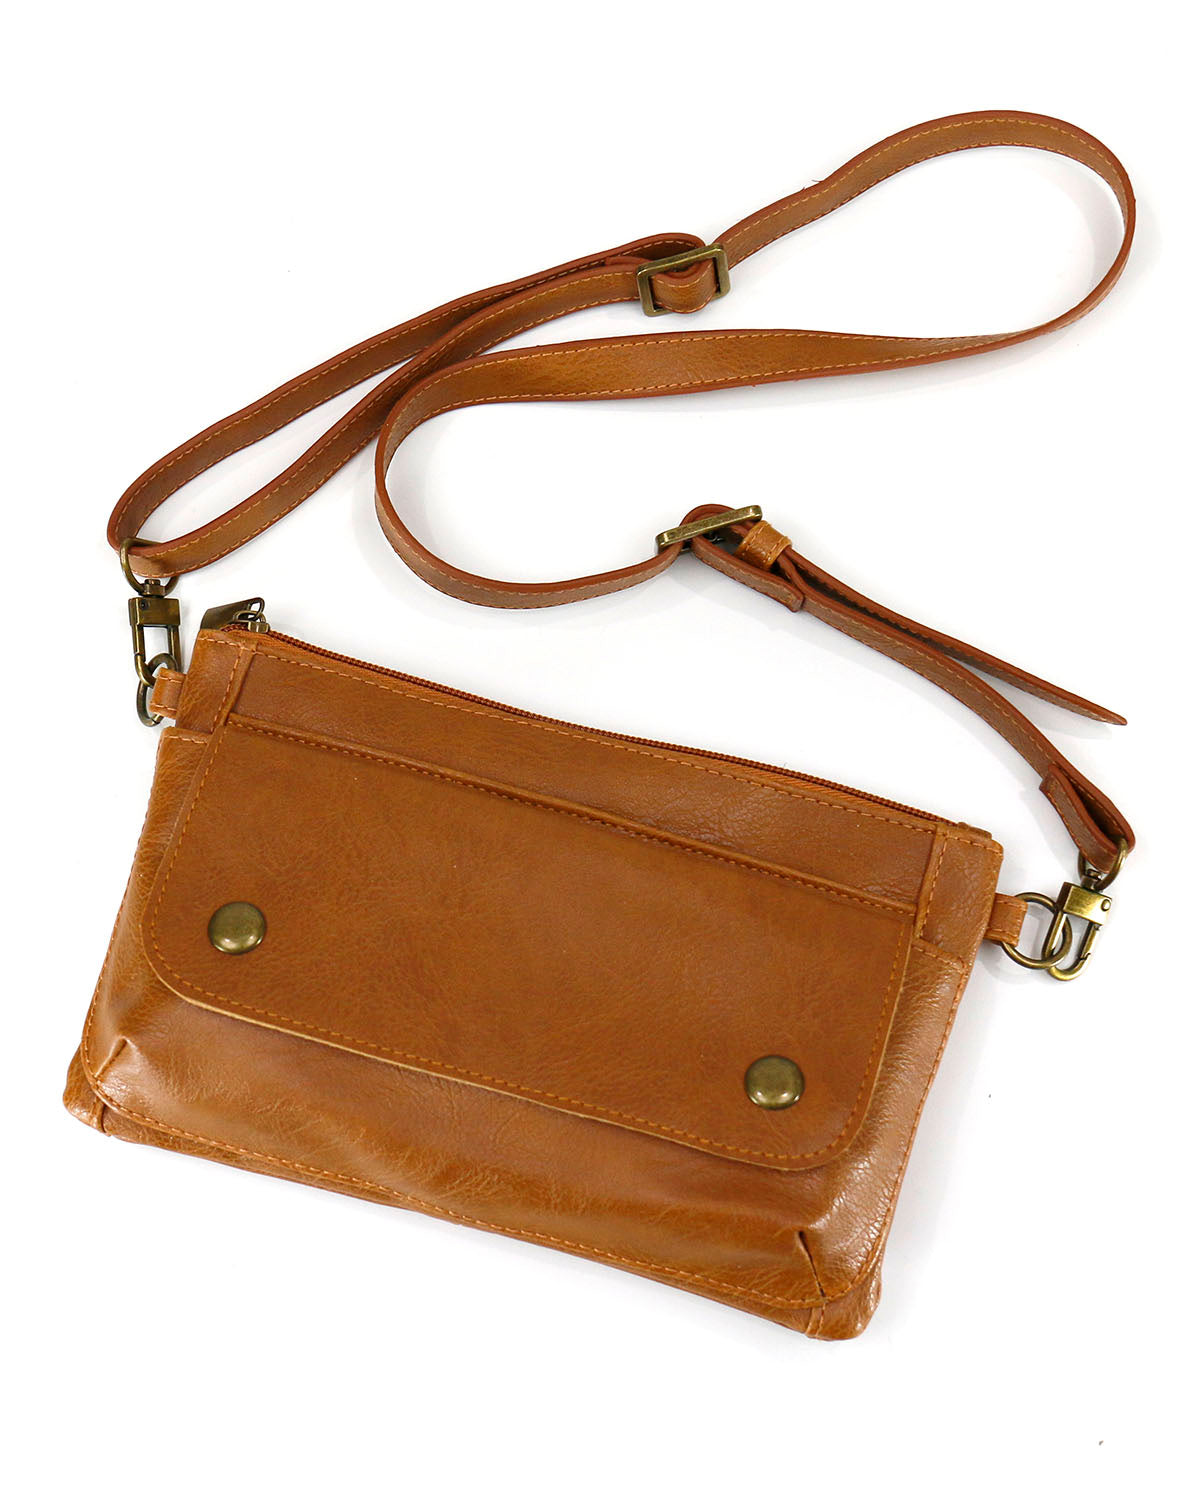 Women's Vegan Leather Essentials Belt Bag in Cognac by Grace and Lace